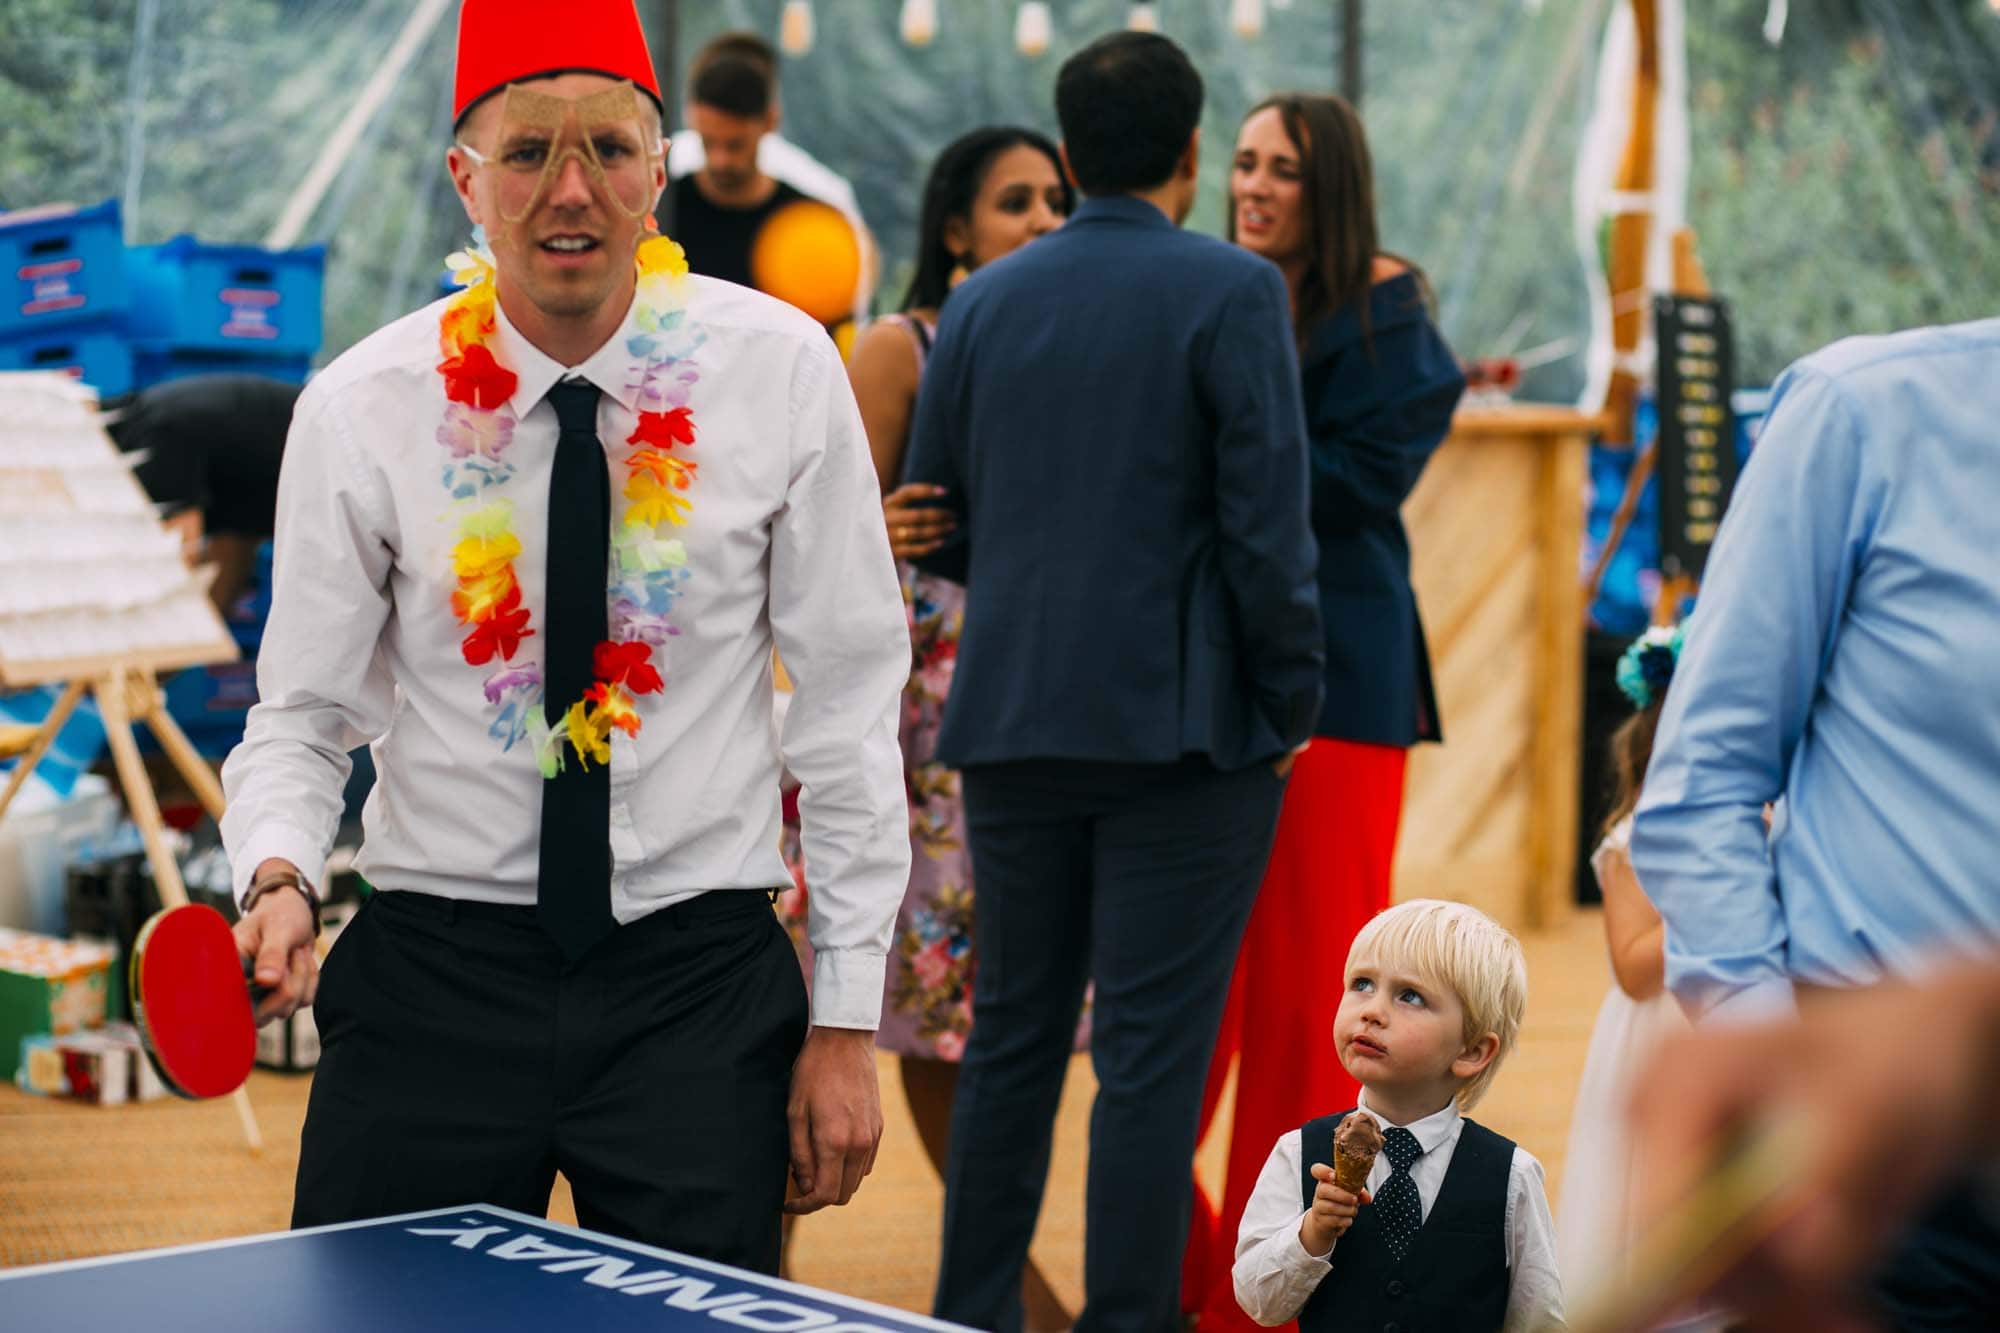 child stares at man in fancy dress